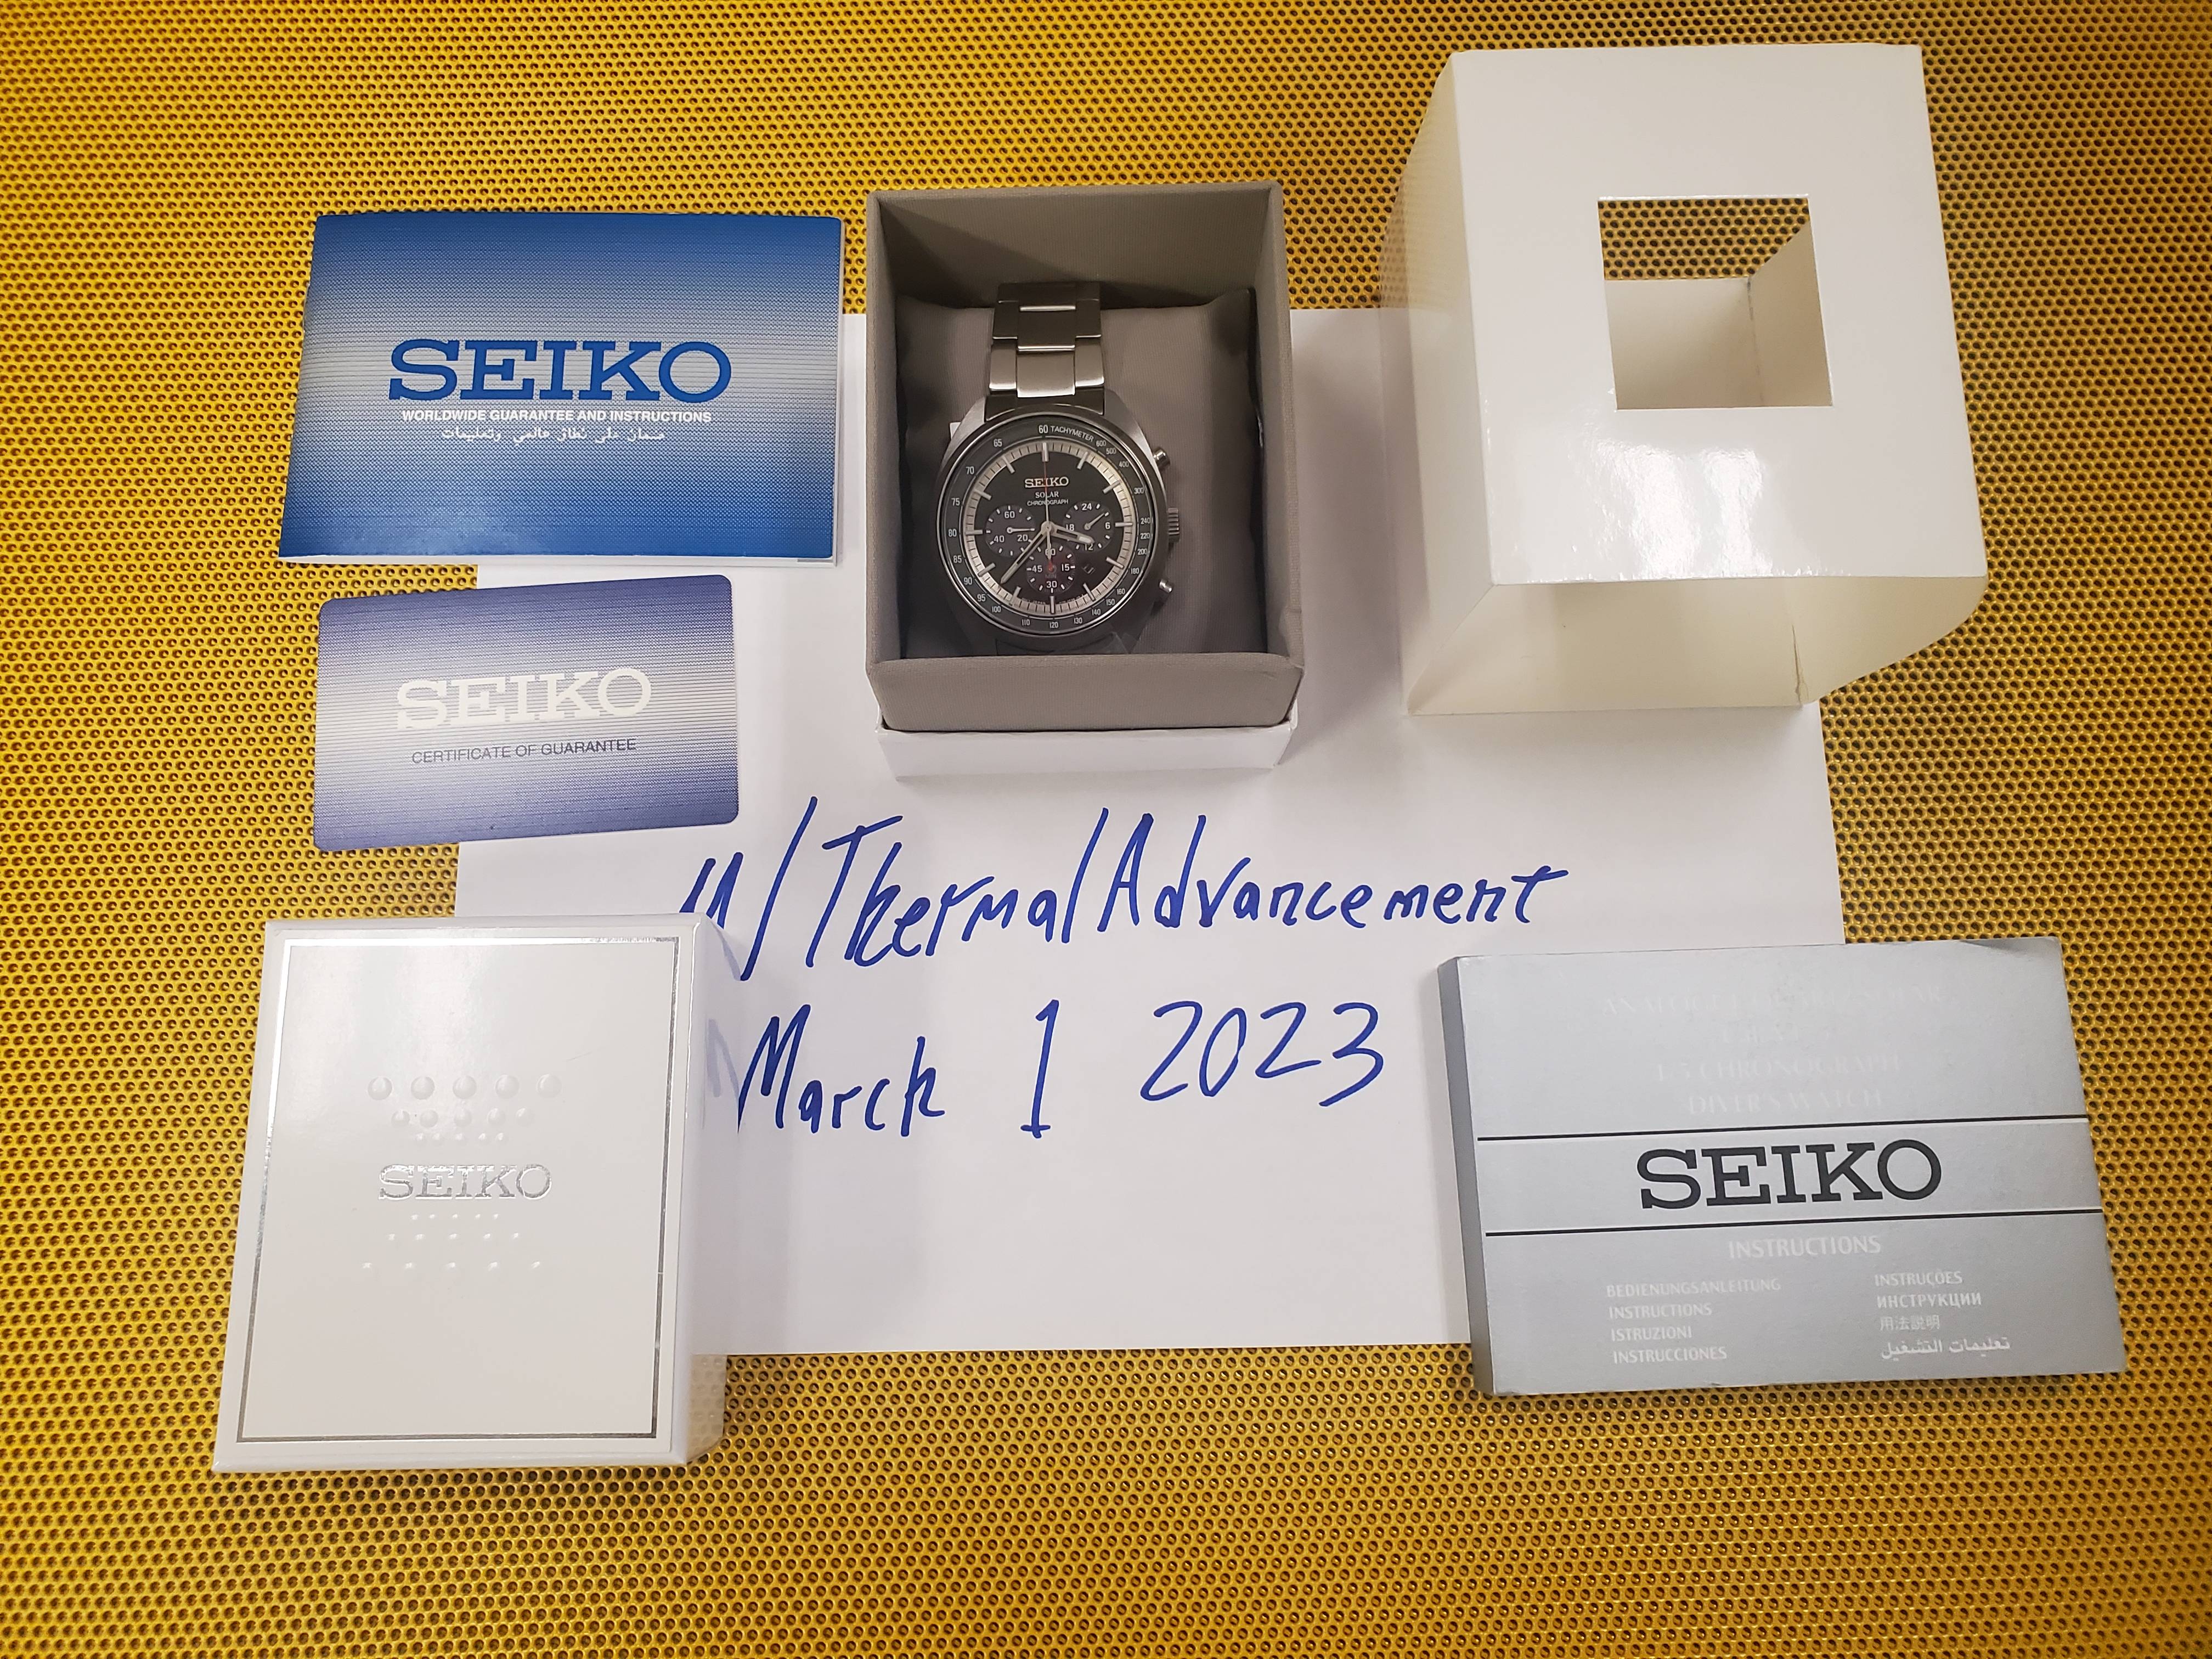 WTS] Seiko SSC621P1 Recraft Solar Chronograph like new with box, and  papers. $125 shipped in the CONTUS. | WatchCharts